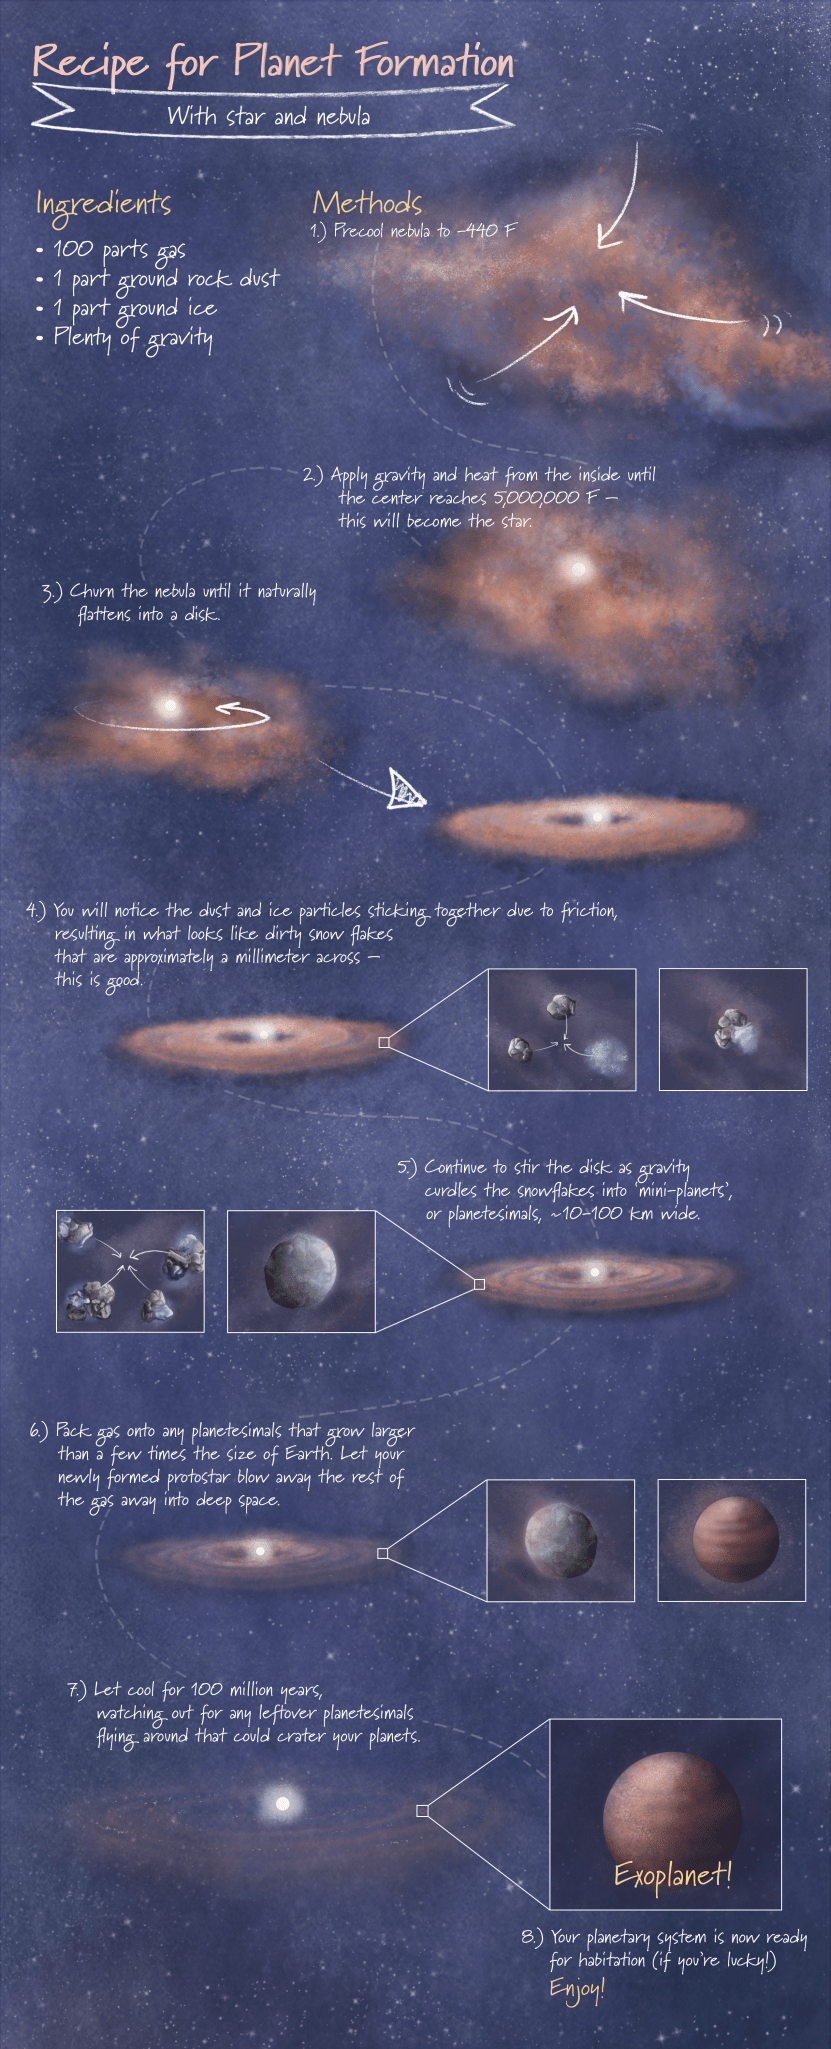 This infographic is an simplified artistic representation of planet formation, following the format of a baking recipe.